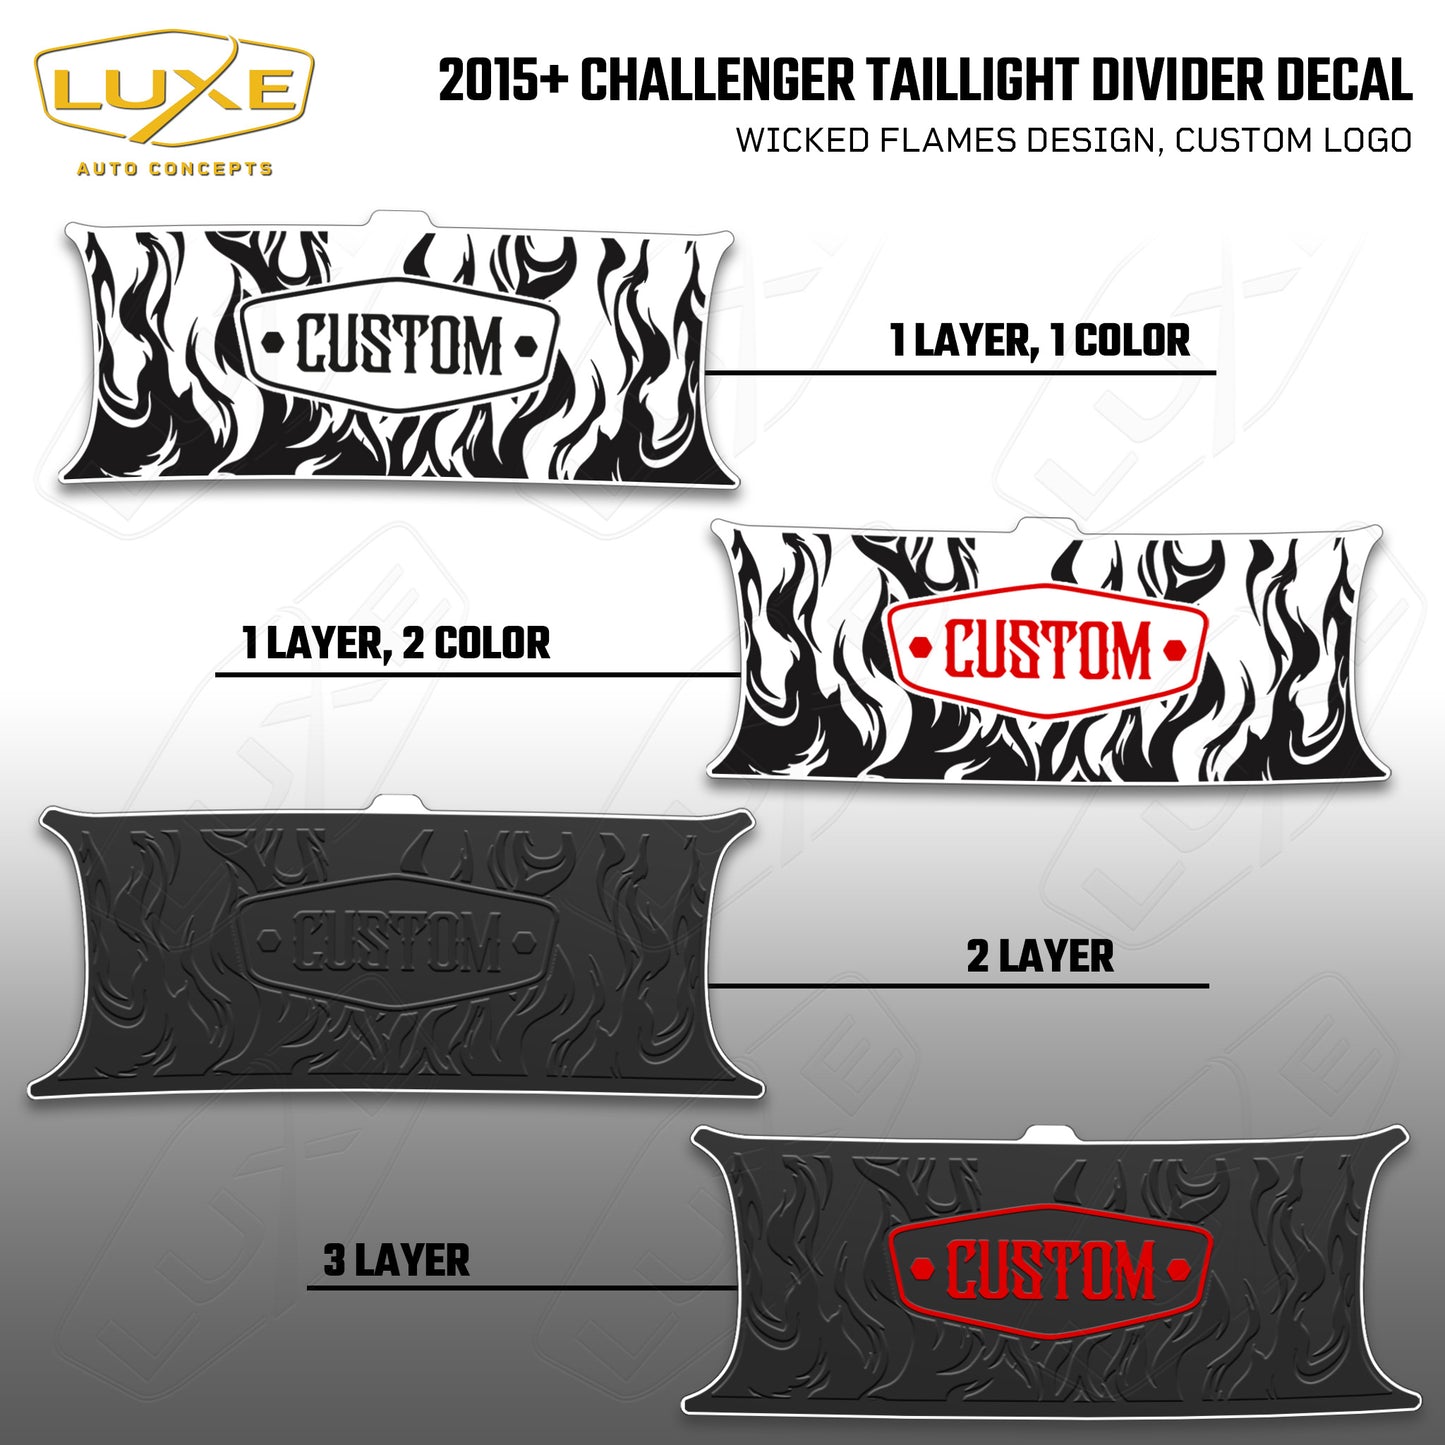 2015+ Challenger Taillight Center Divider Decal - Wicked Flames Design, Custom Logo